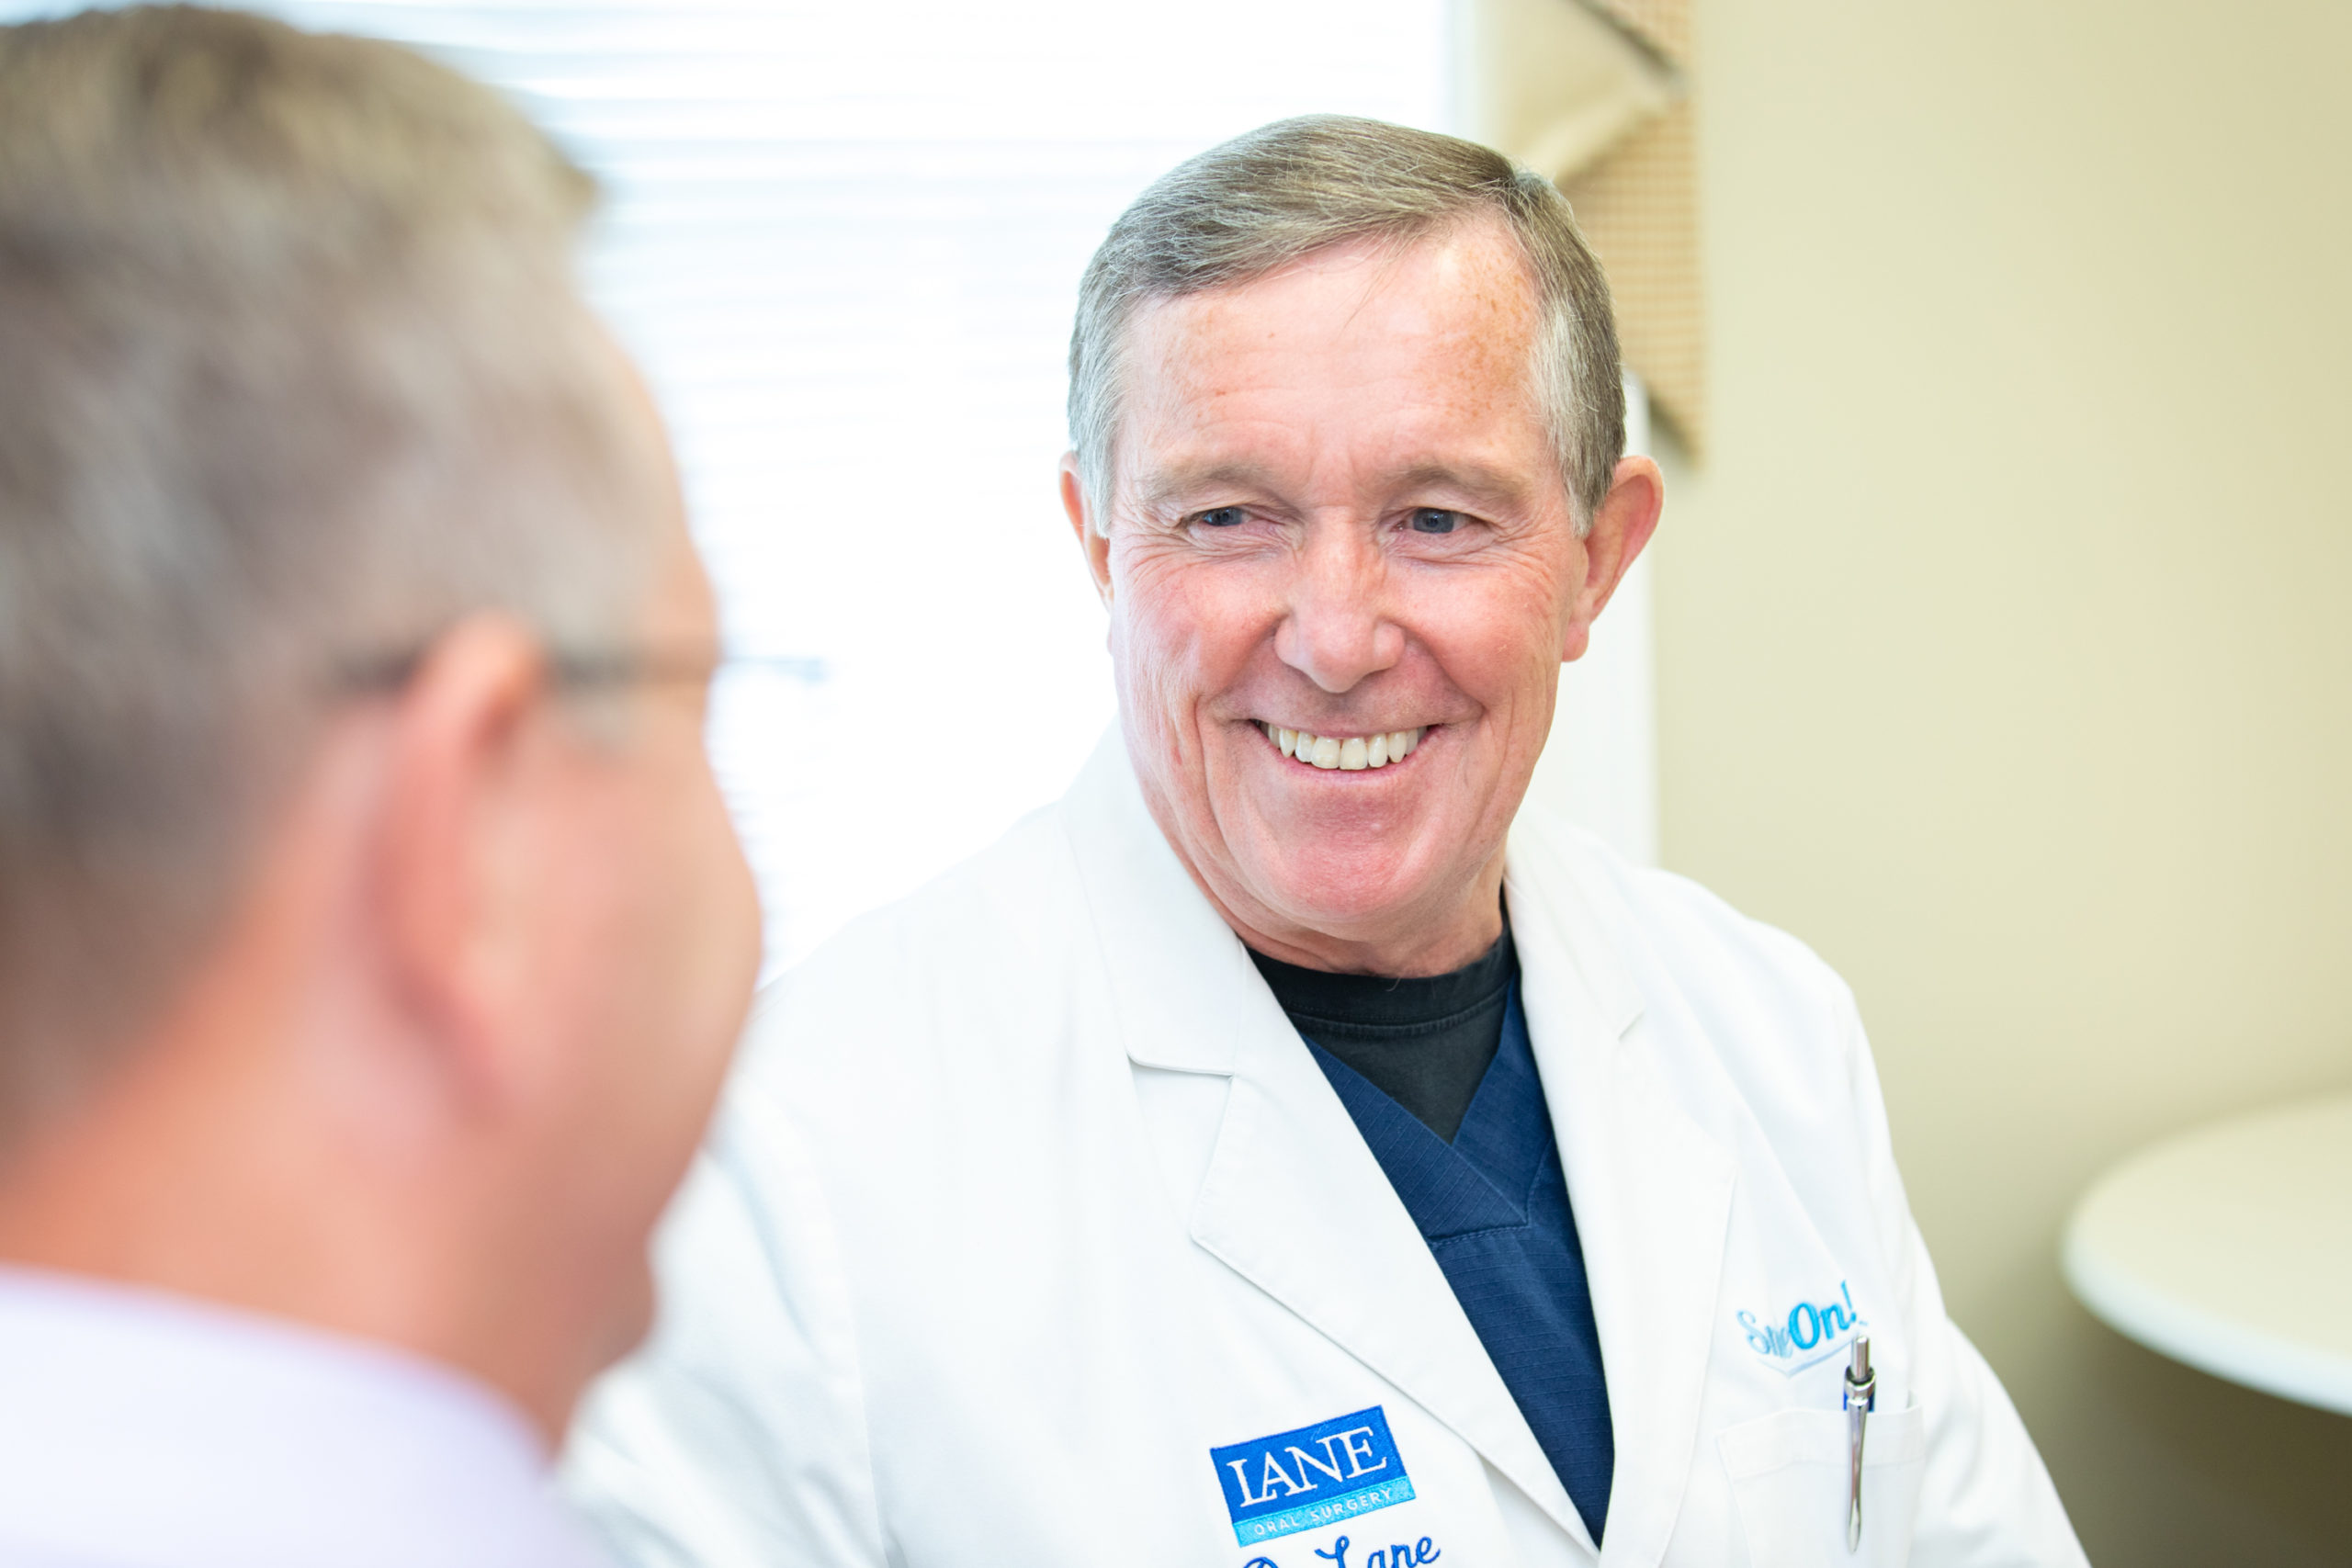 doctor lane with a smile on dental implant procedure patient in a consultation.